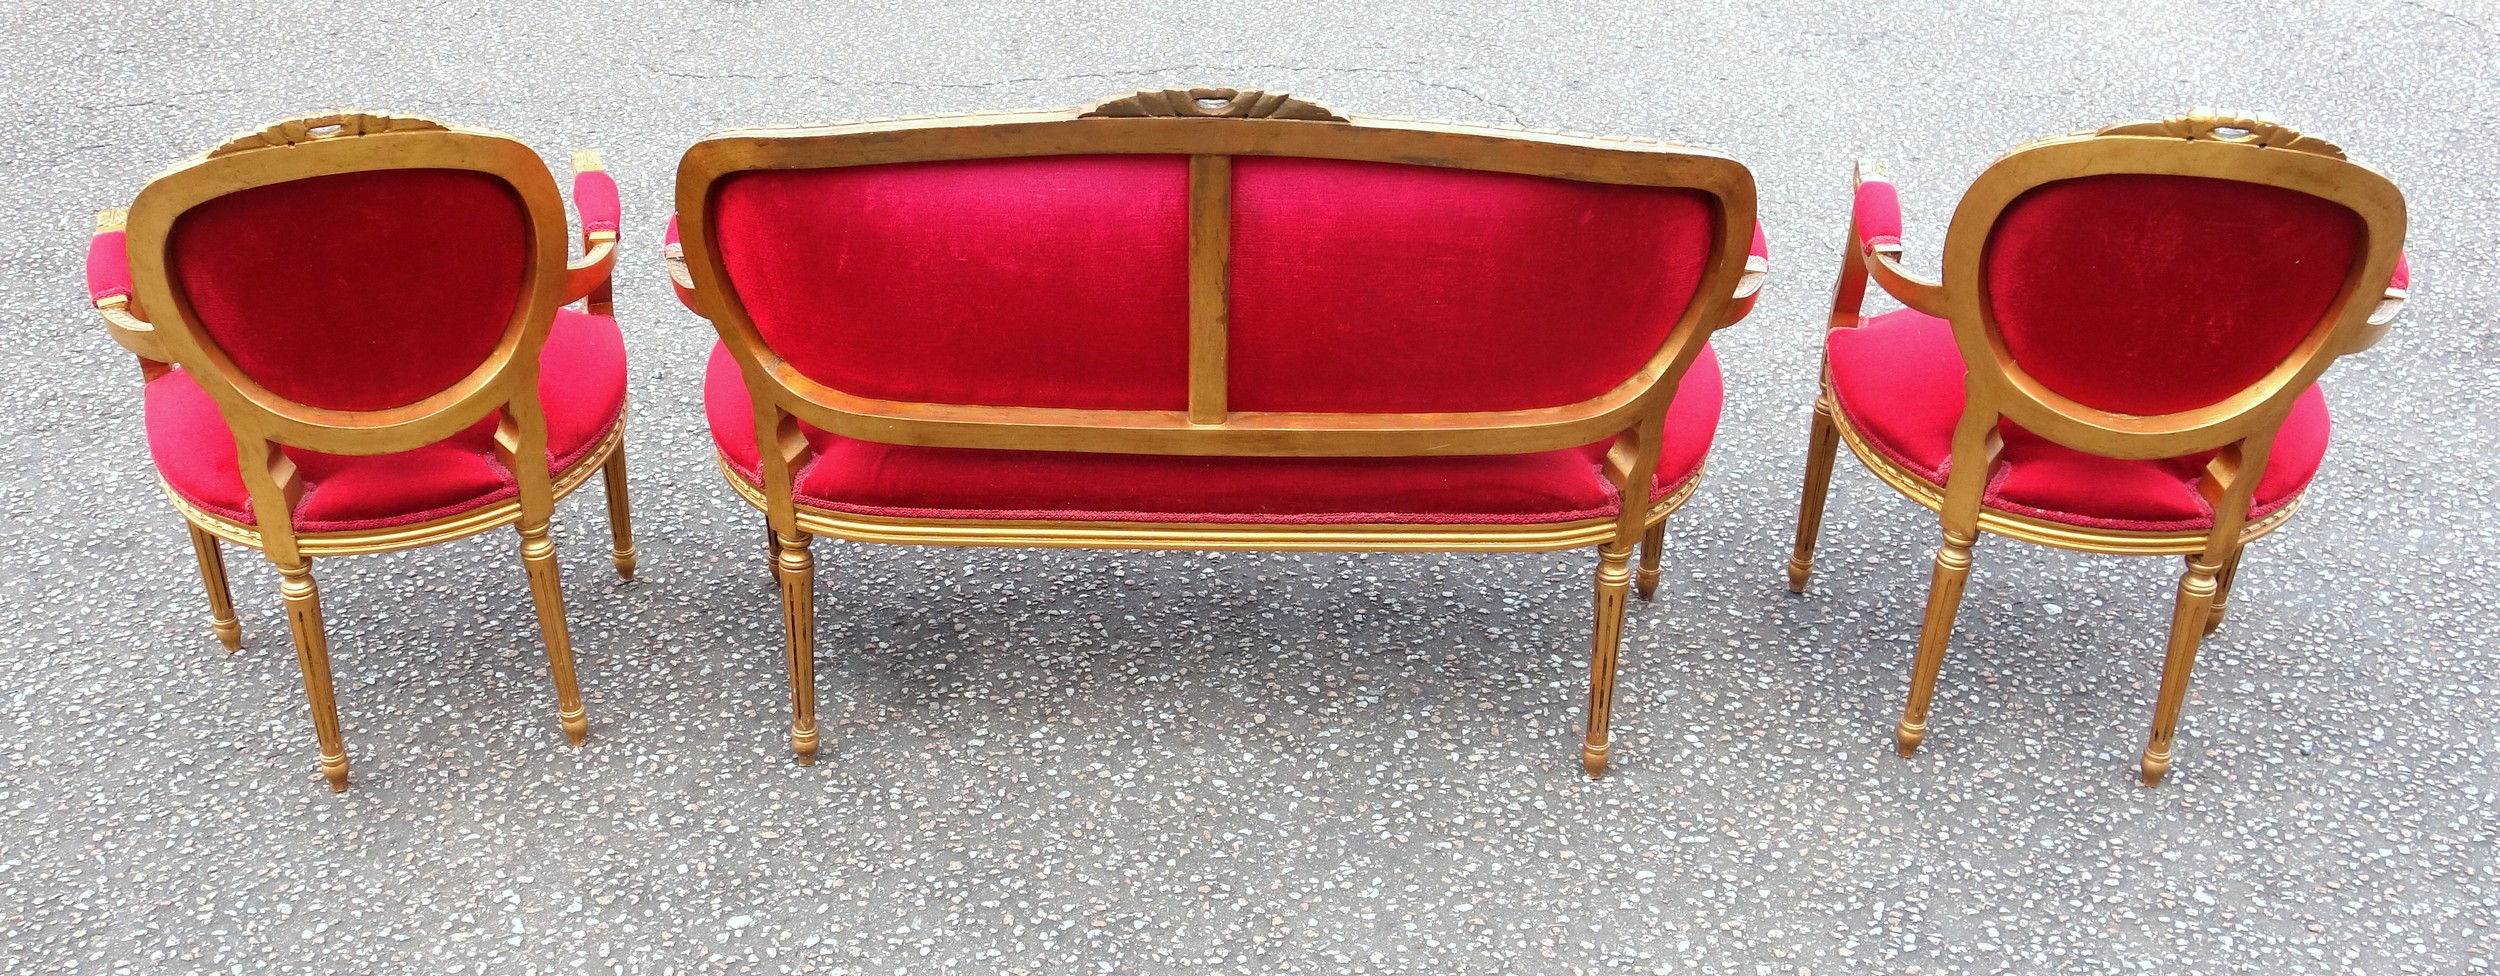 Louis XVI style 3 piece giltwood salon suite with carved leaf and ribbon decoration, comprising a - Image 3 of 3